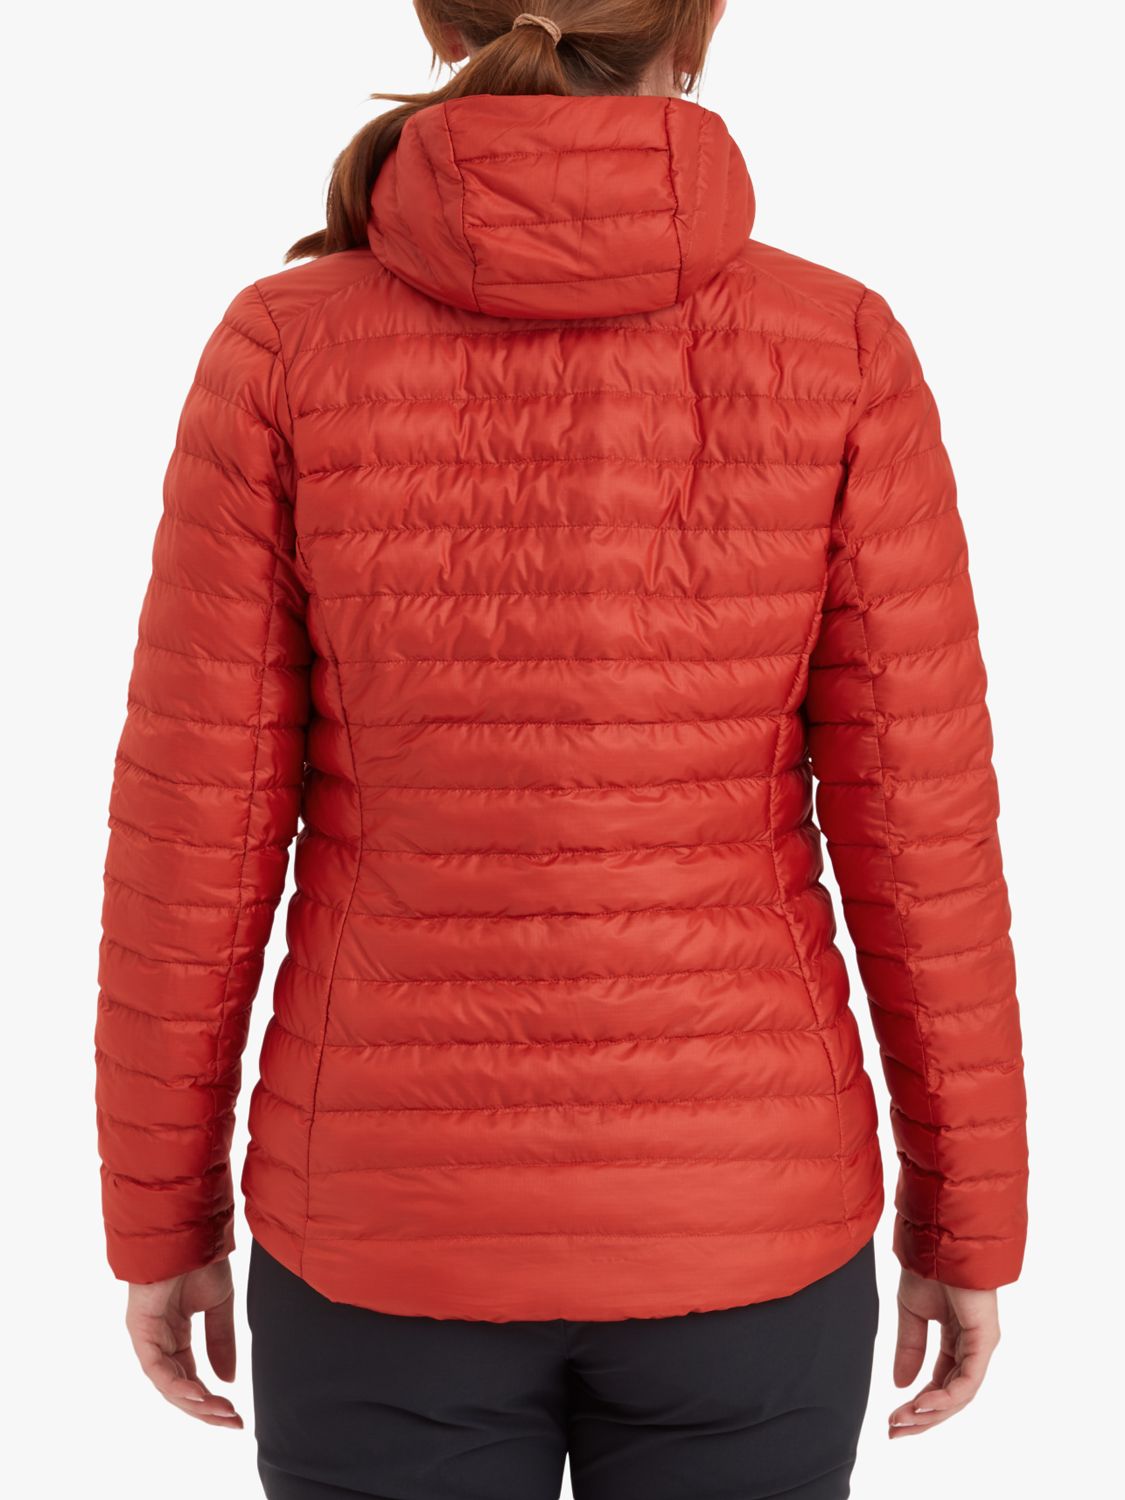 Montane Women's Icarus Insulated Hooded Jacket - Saffron Red